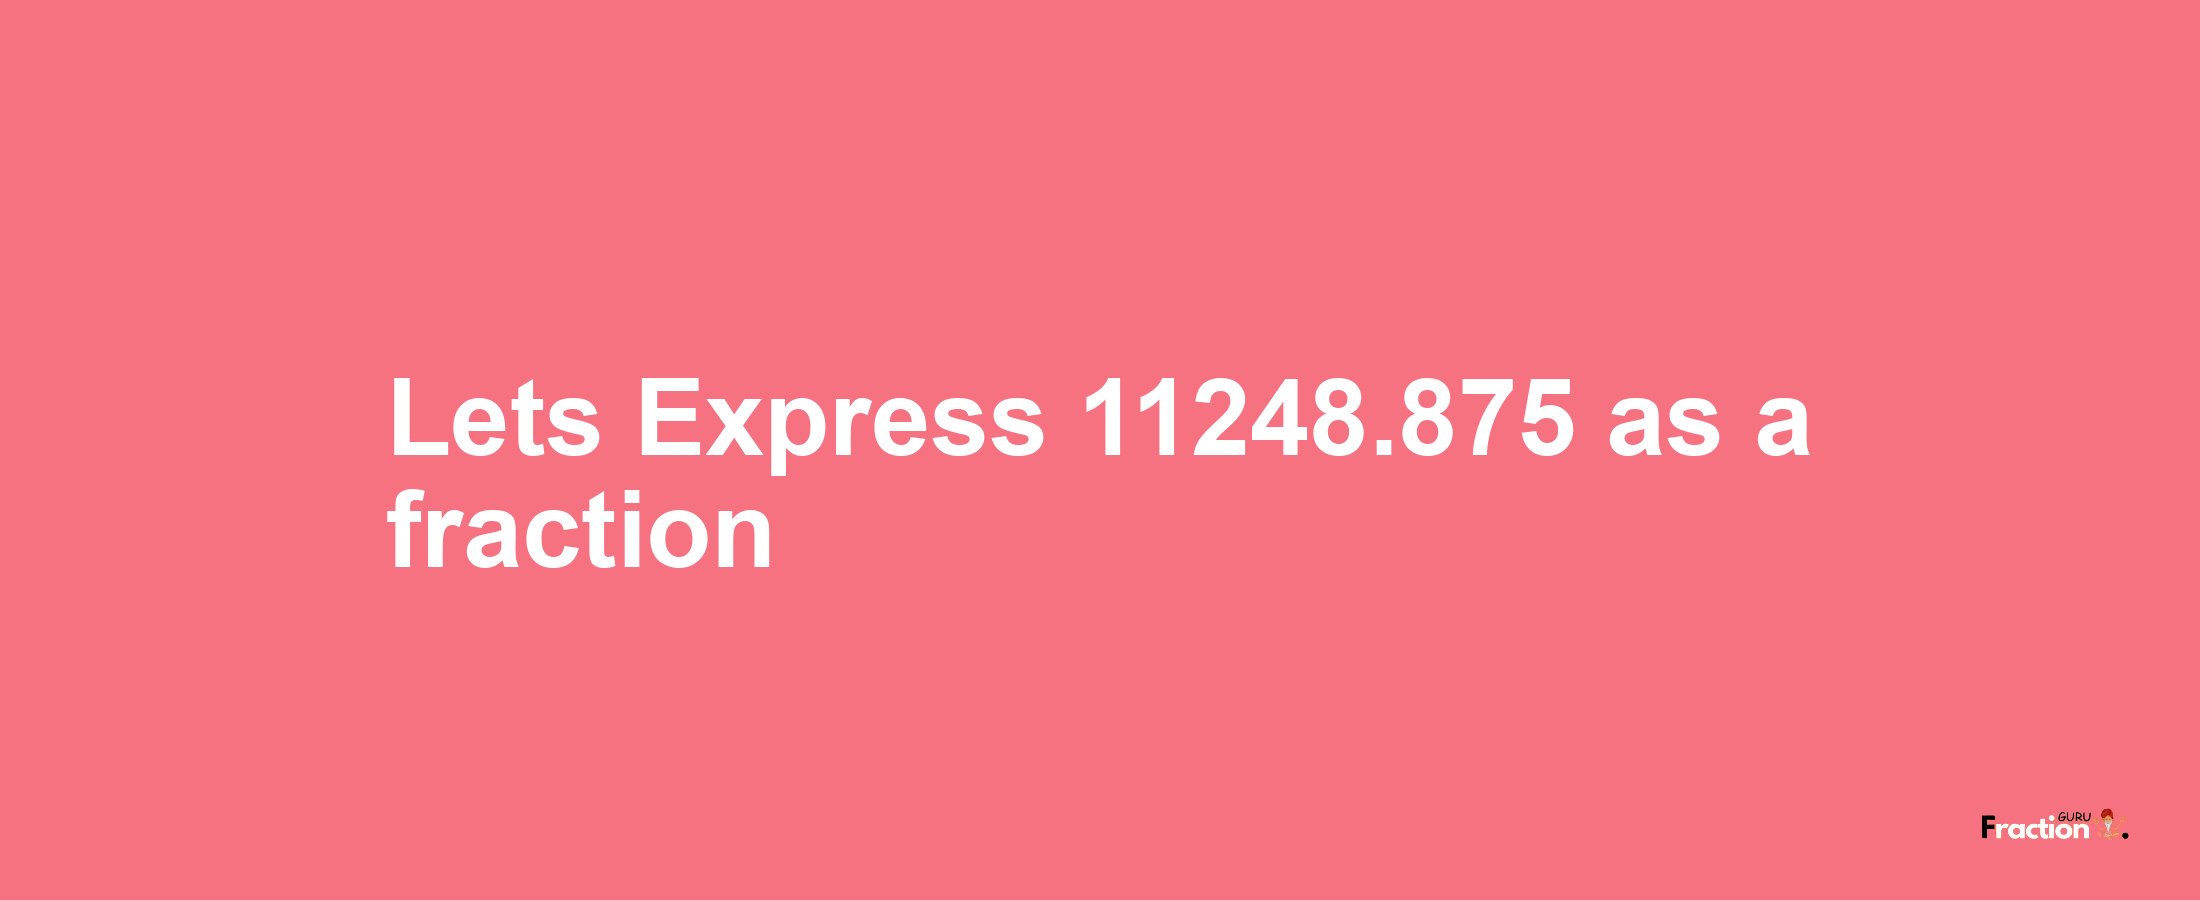 Lets Express 11248.875 as afraction